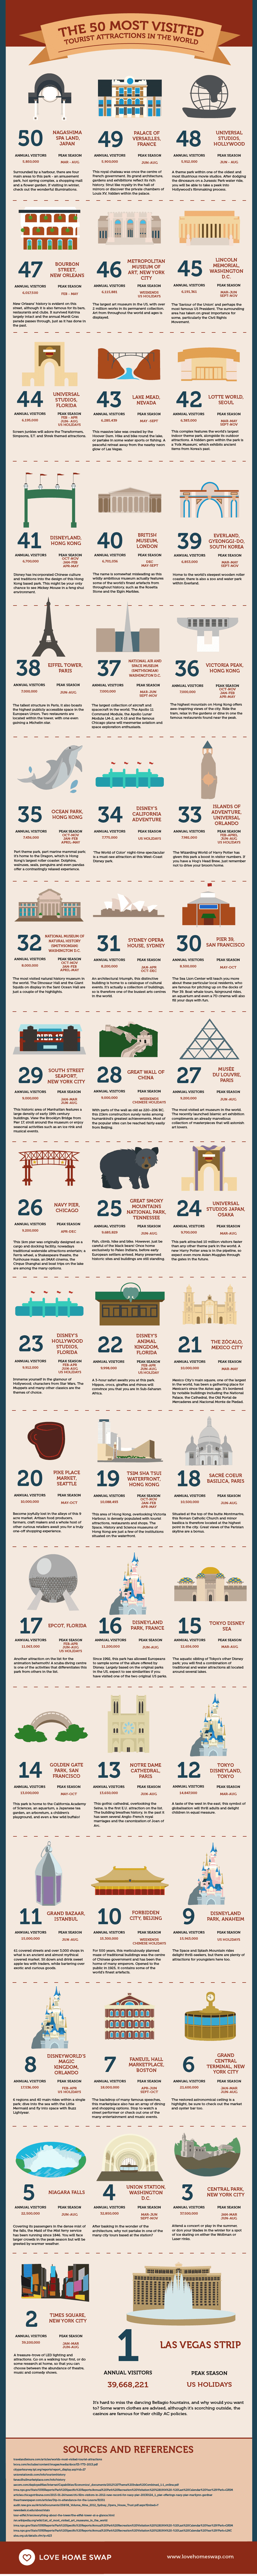 The-worlds-50-most-visited-tourist-attractions